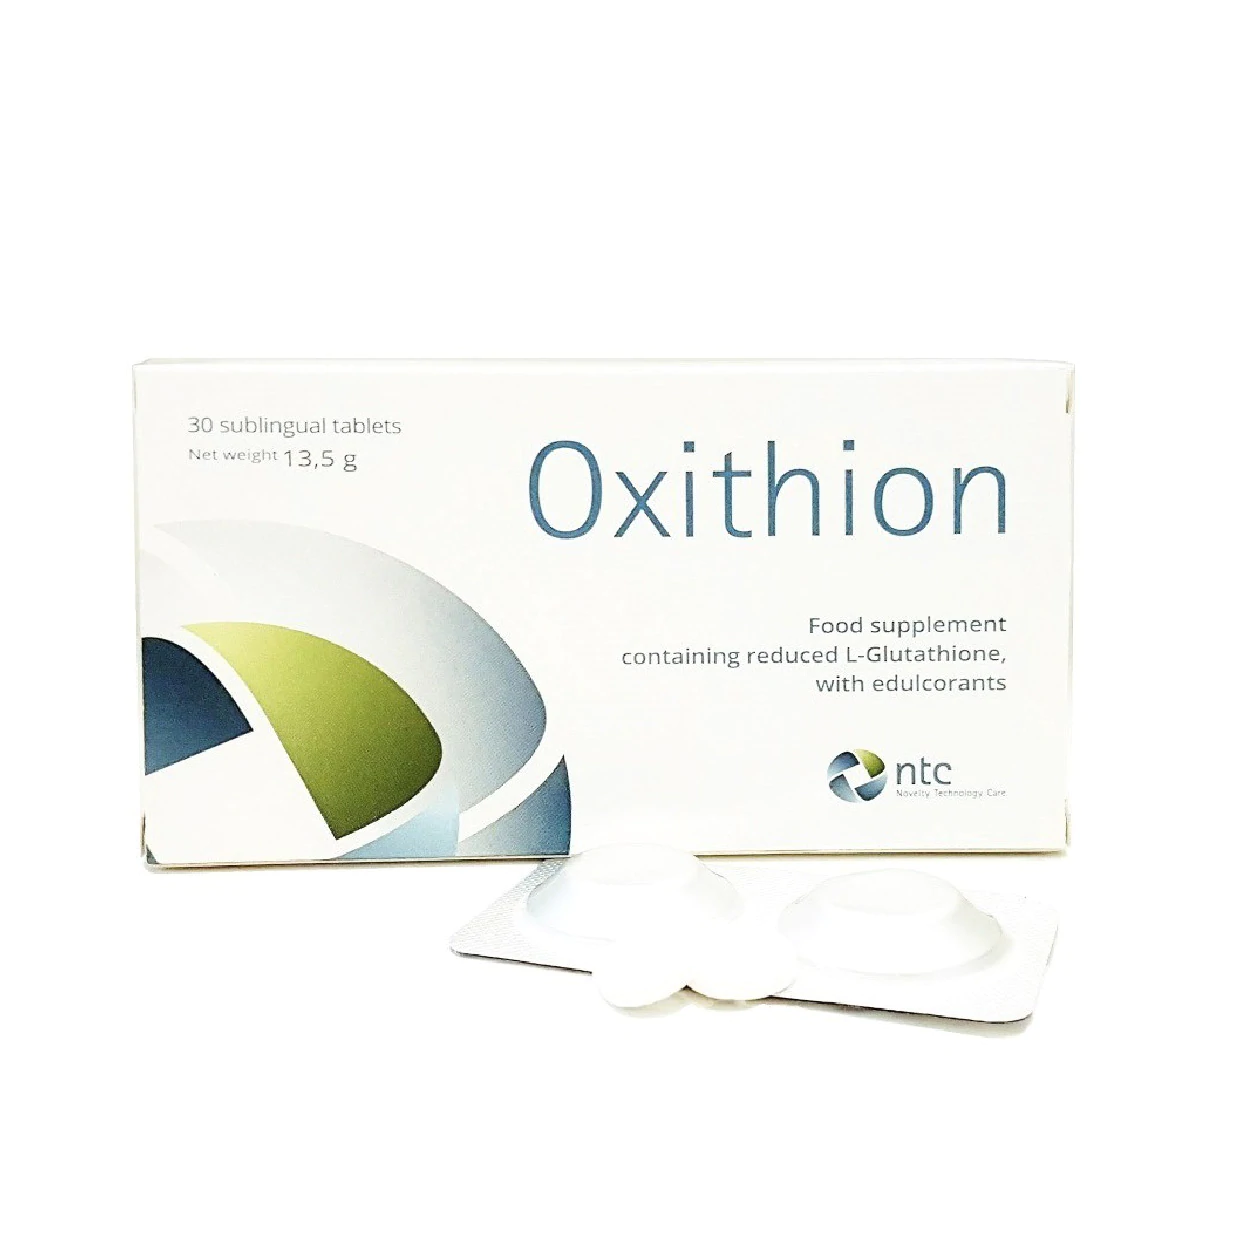 oxithion oral sunscreen supplement box and inner pack with 2 tablets white background